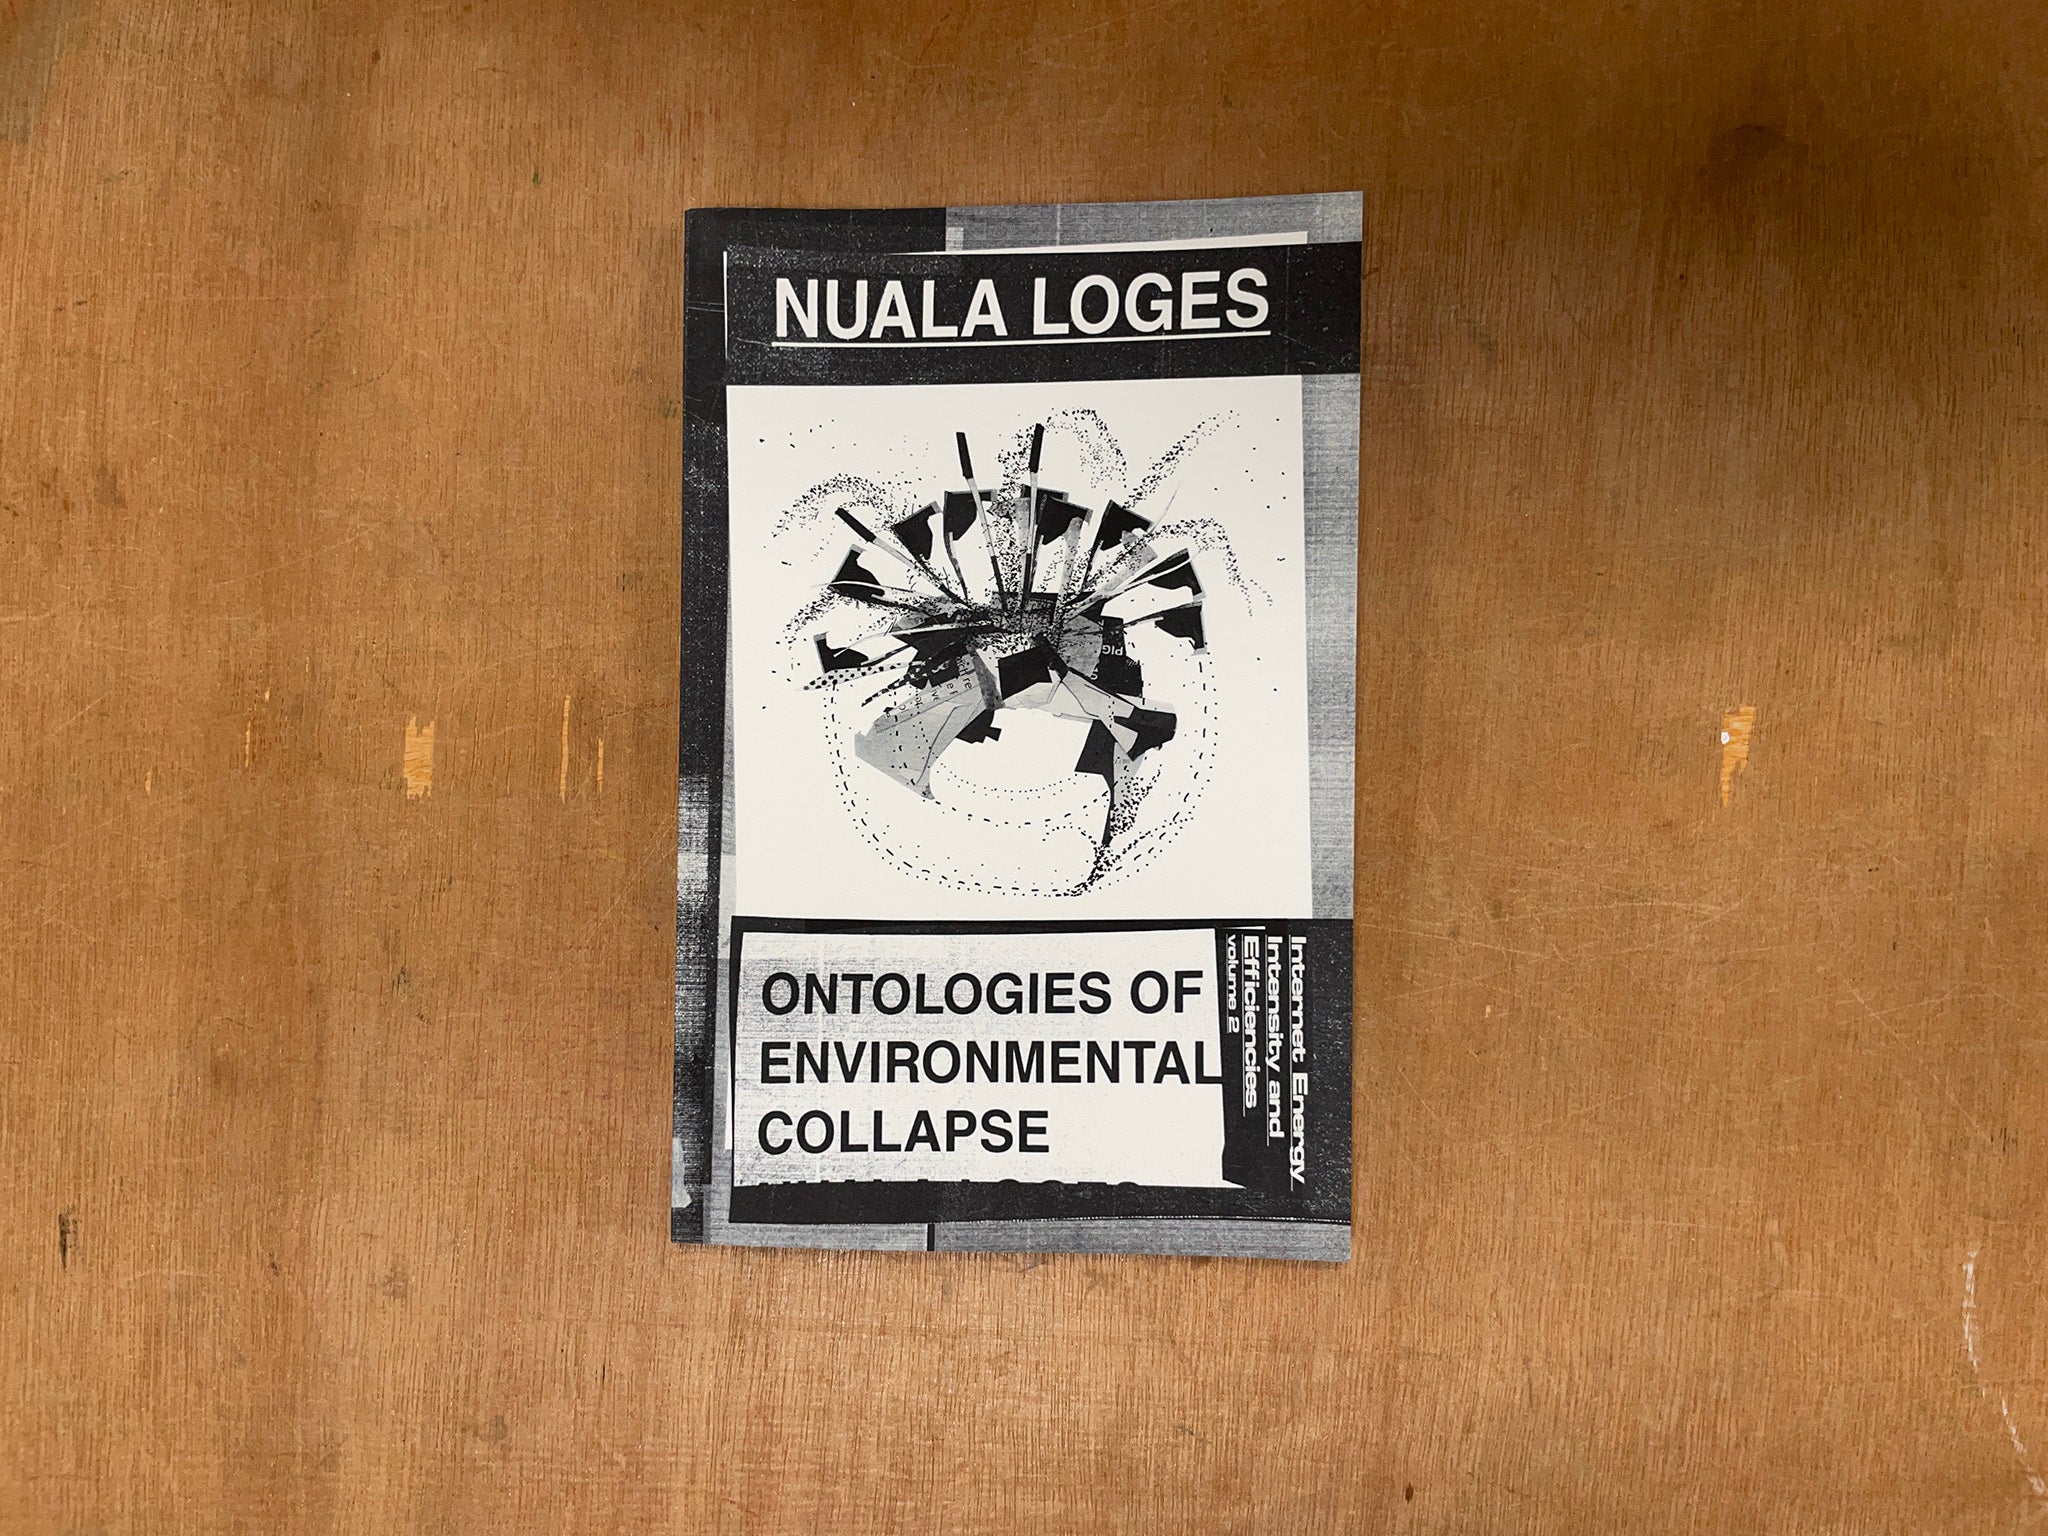 ONTOLOGIES OF ENVIRONMENTAL COLLAPSE by Nuala Loges